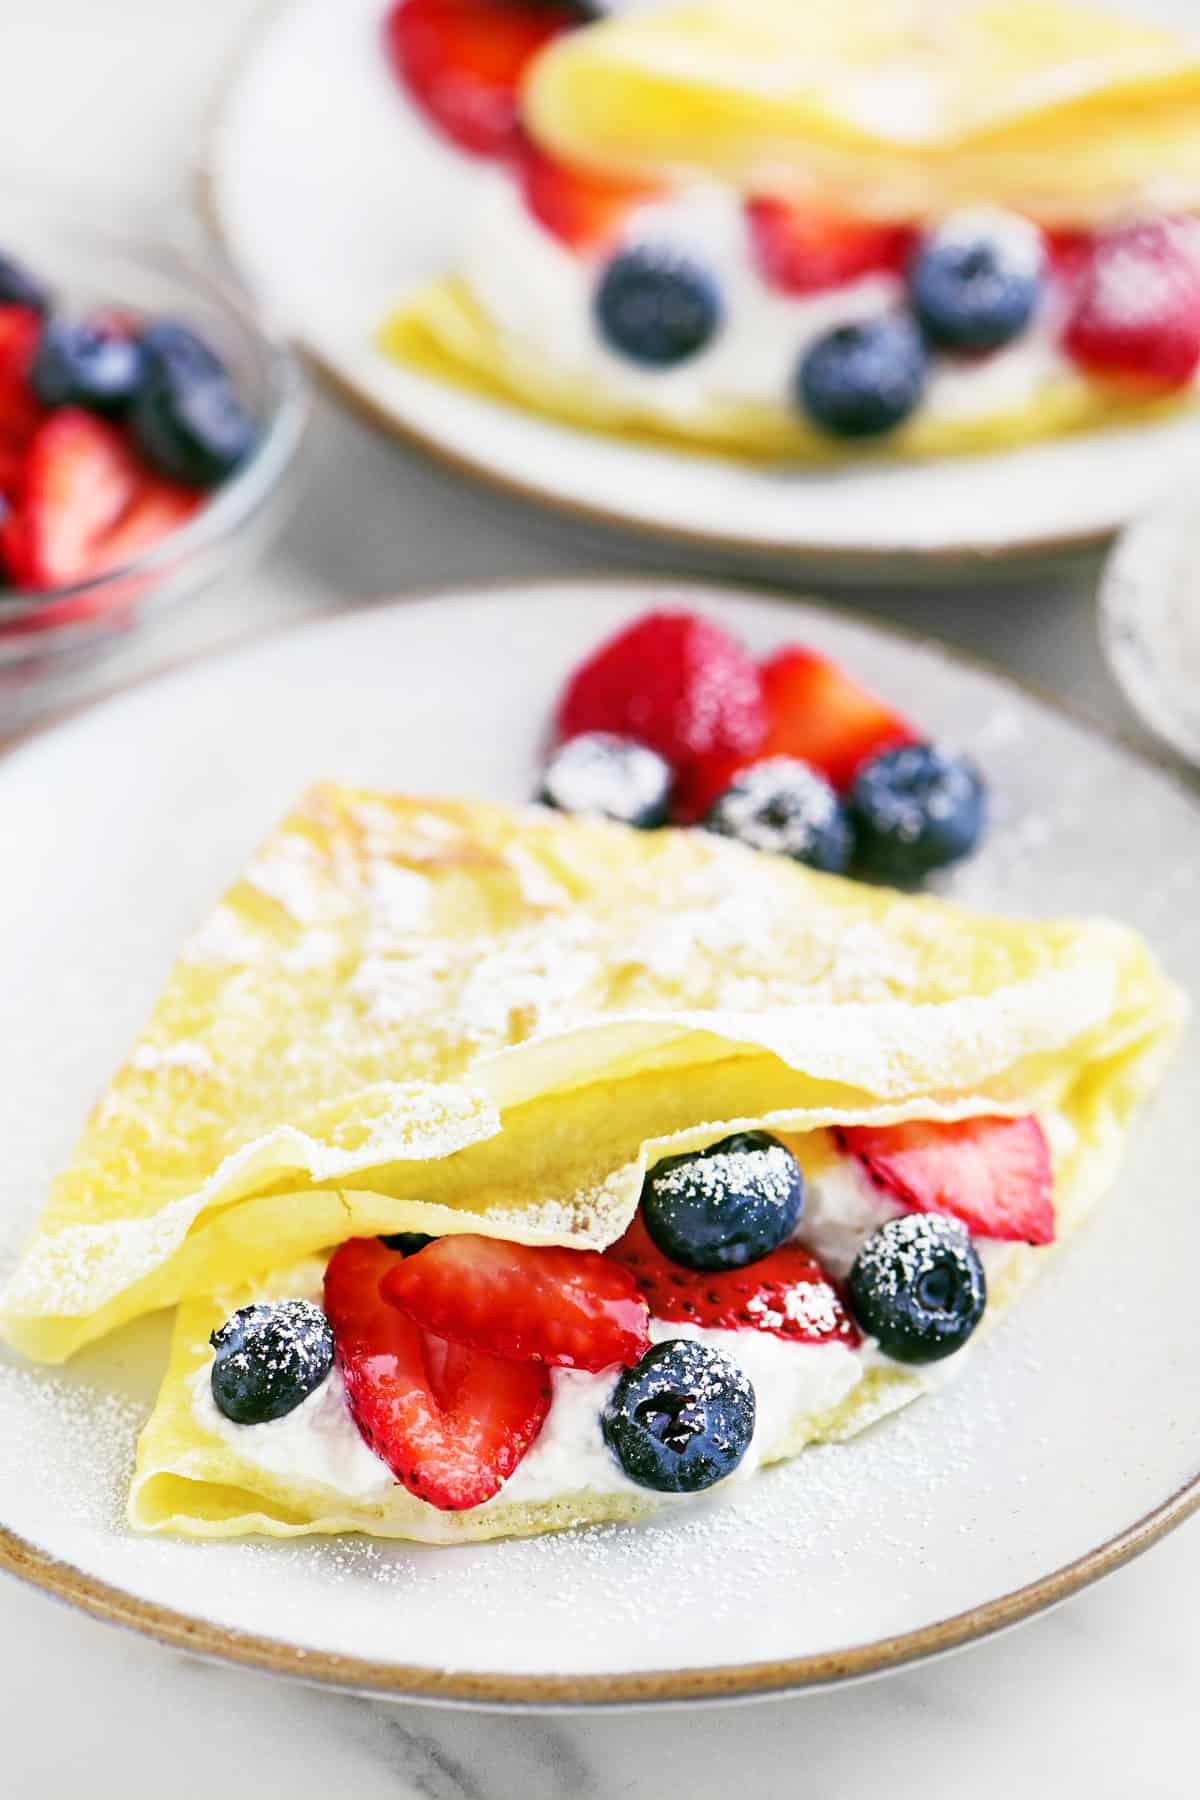 Bisquick crepes with berries and whipped cream.